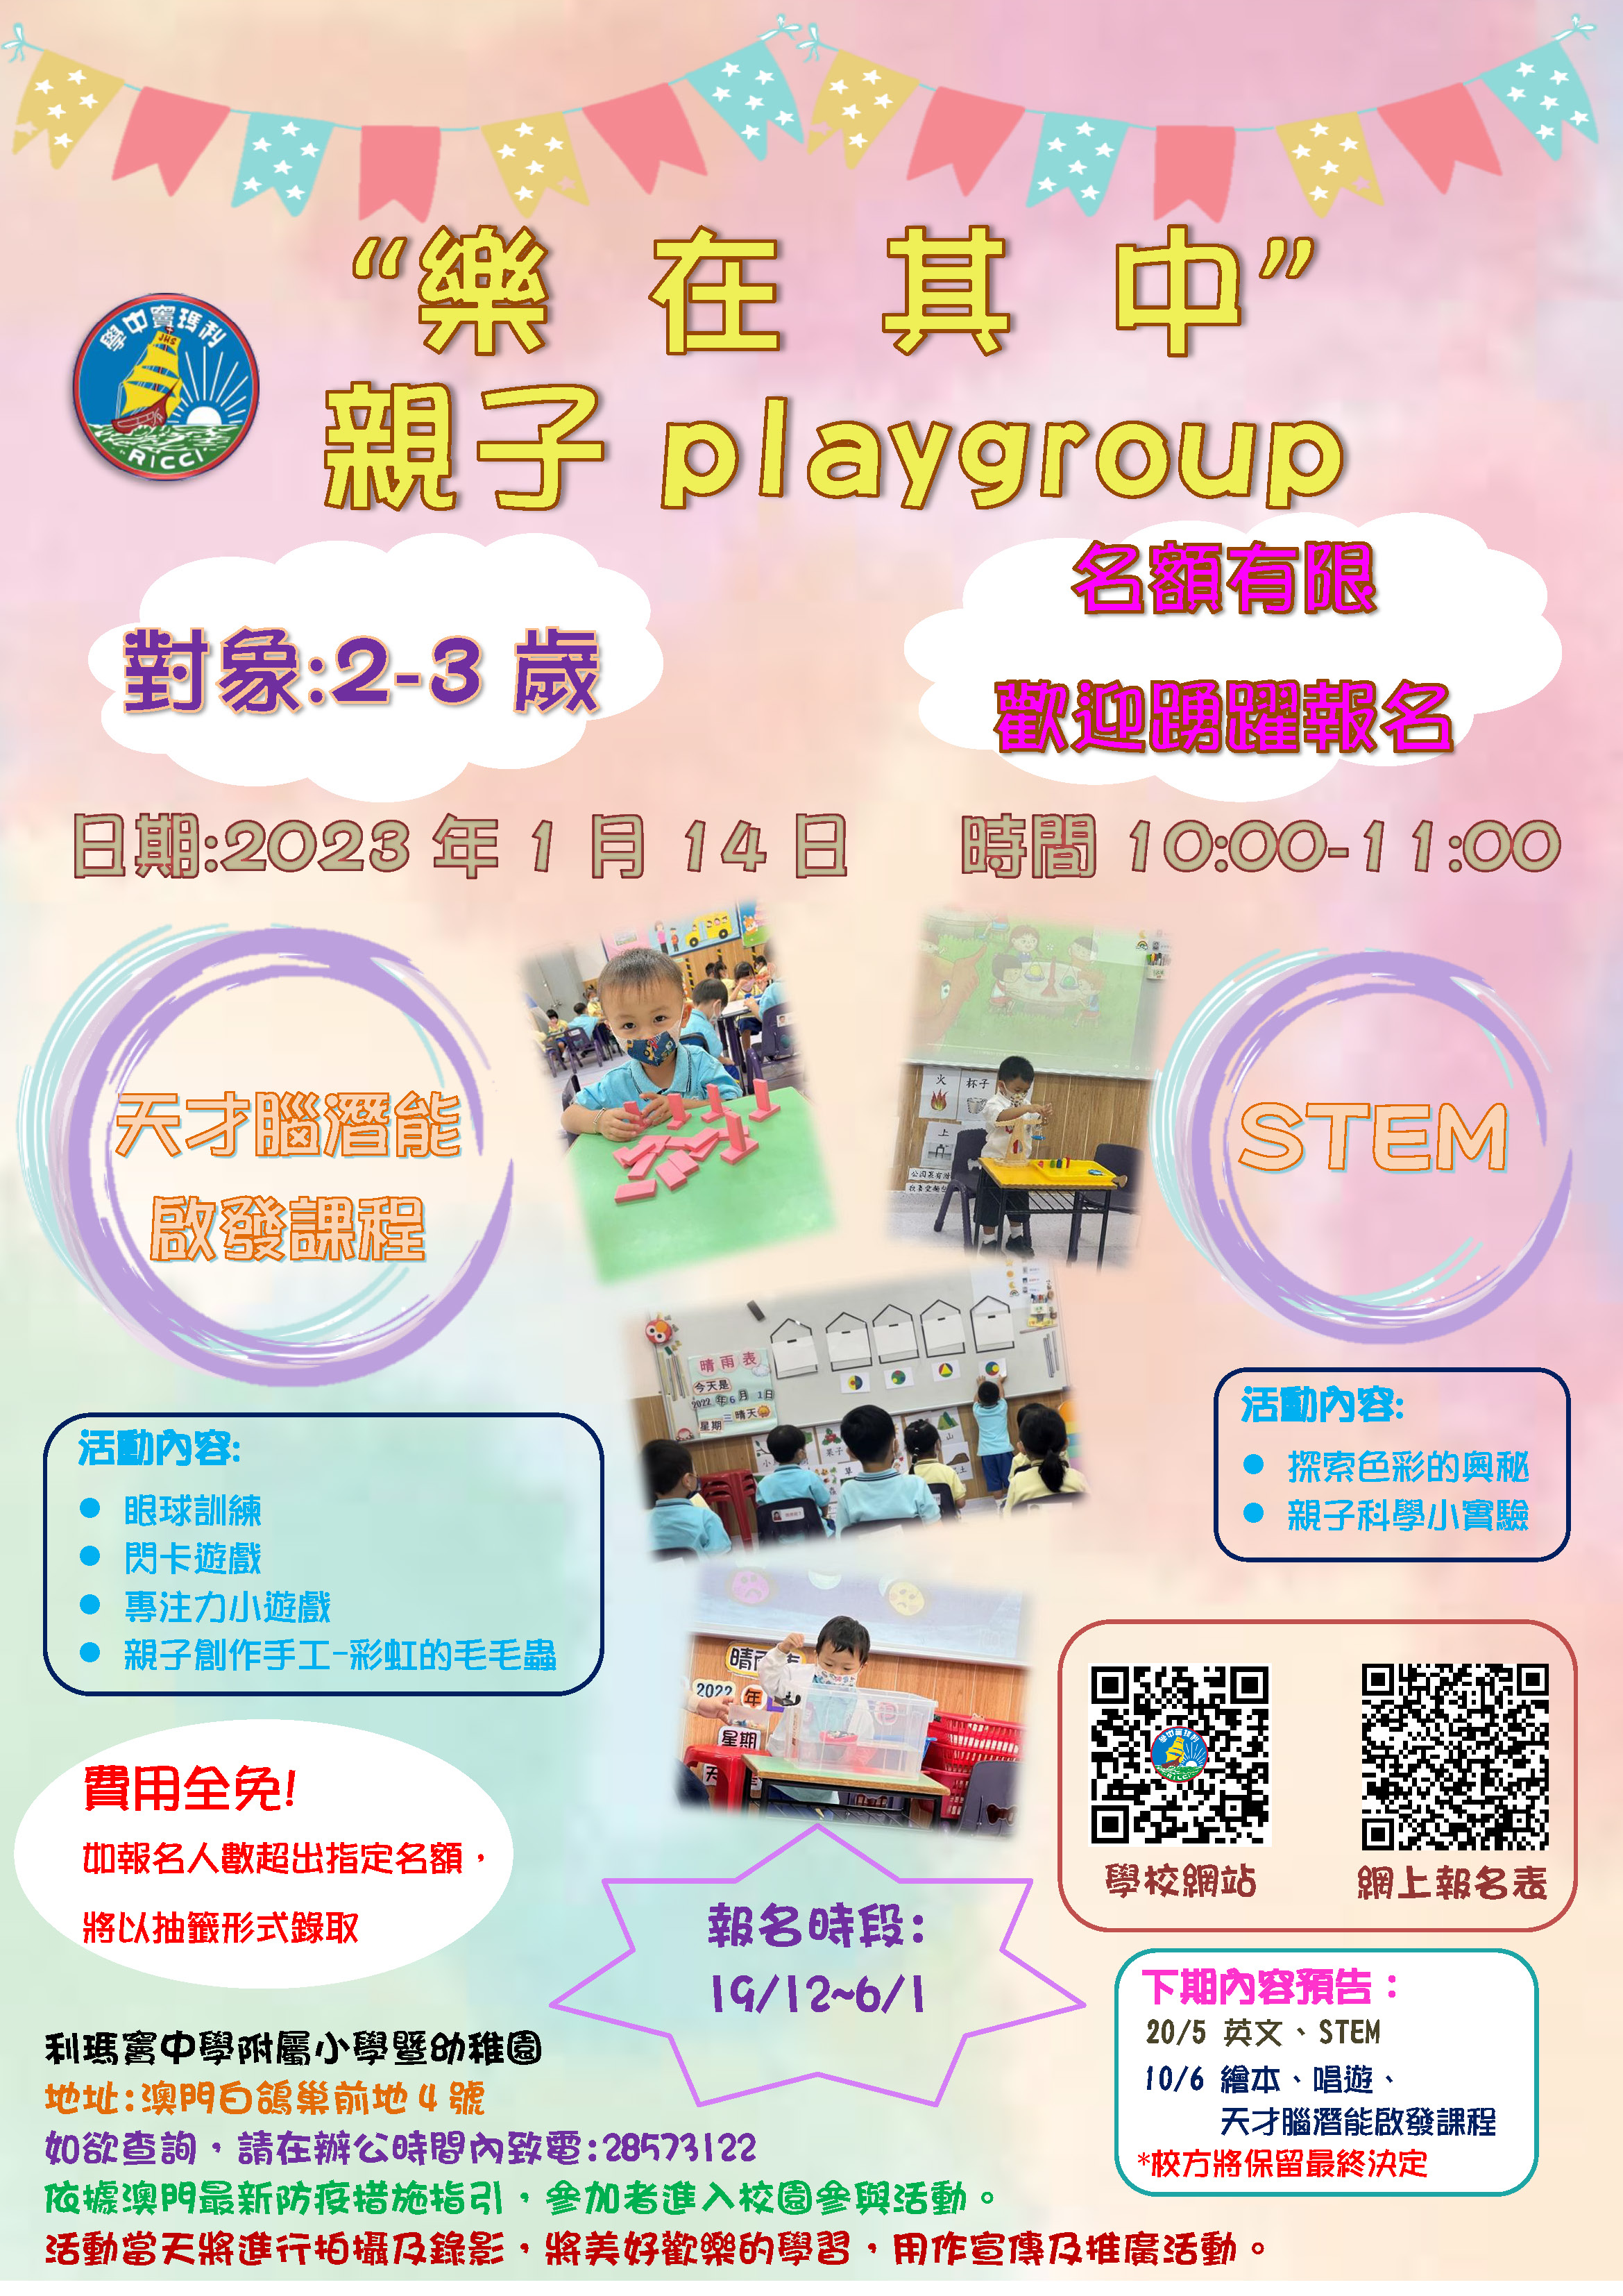 Playgroup3 Poster